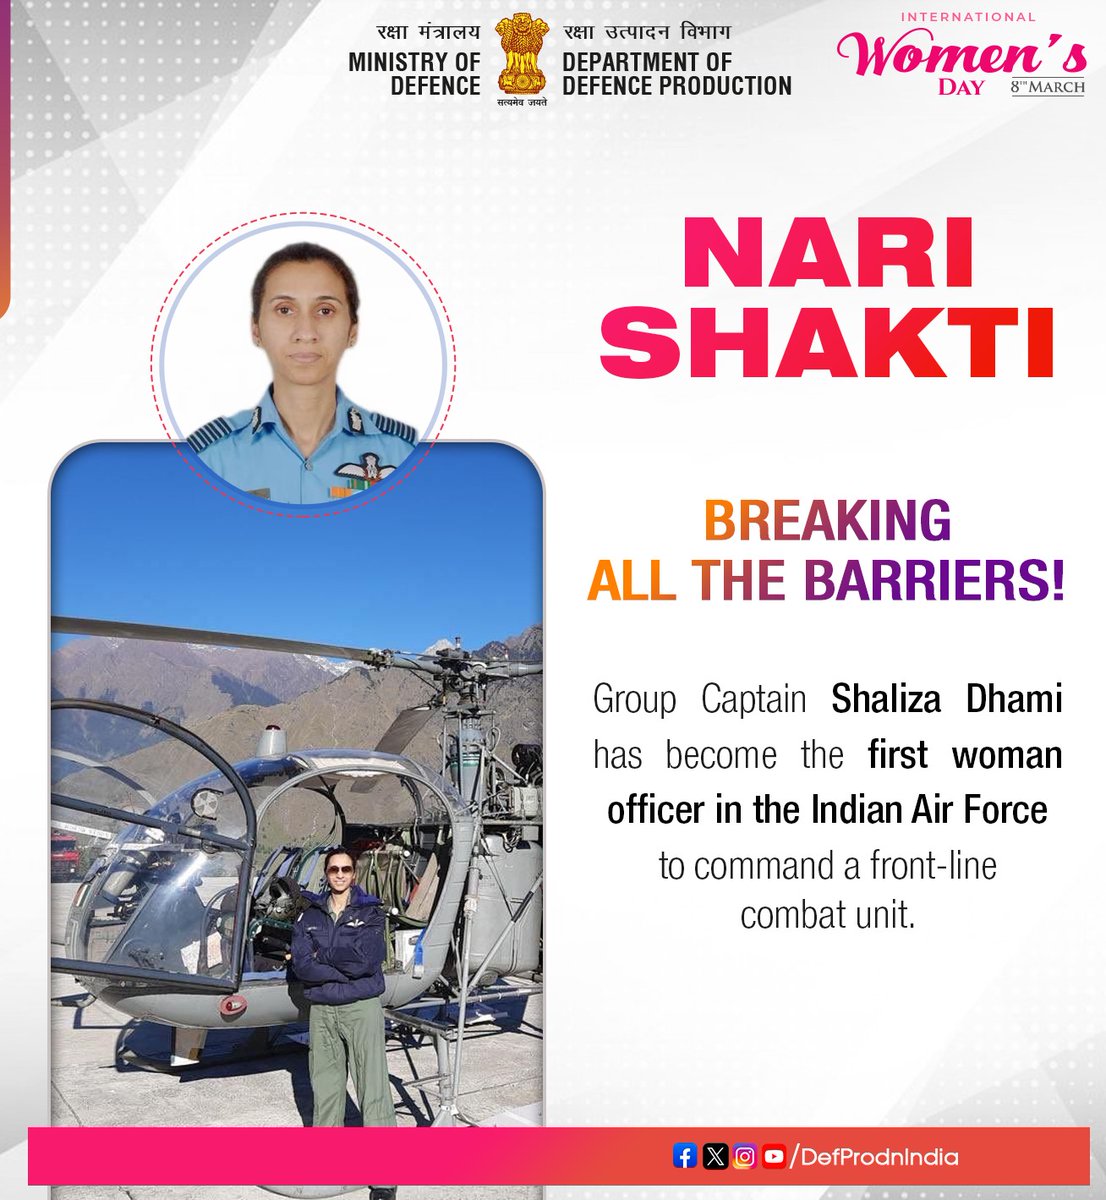 #NariShakti Breaking all the barriers!  Group Captain #ShalizaDhami has become the first woman officer in the Indian Air Force to command a front-line combat unit. #InternationalWomensDay #ViksitBharat #WomenEmpowerment @IAF_MCC